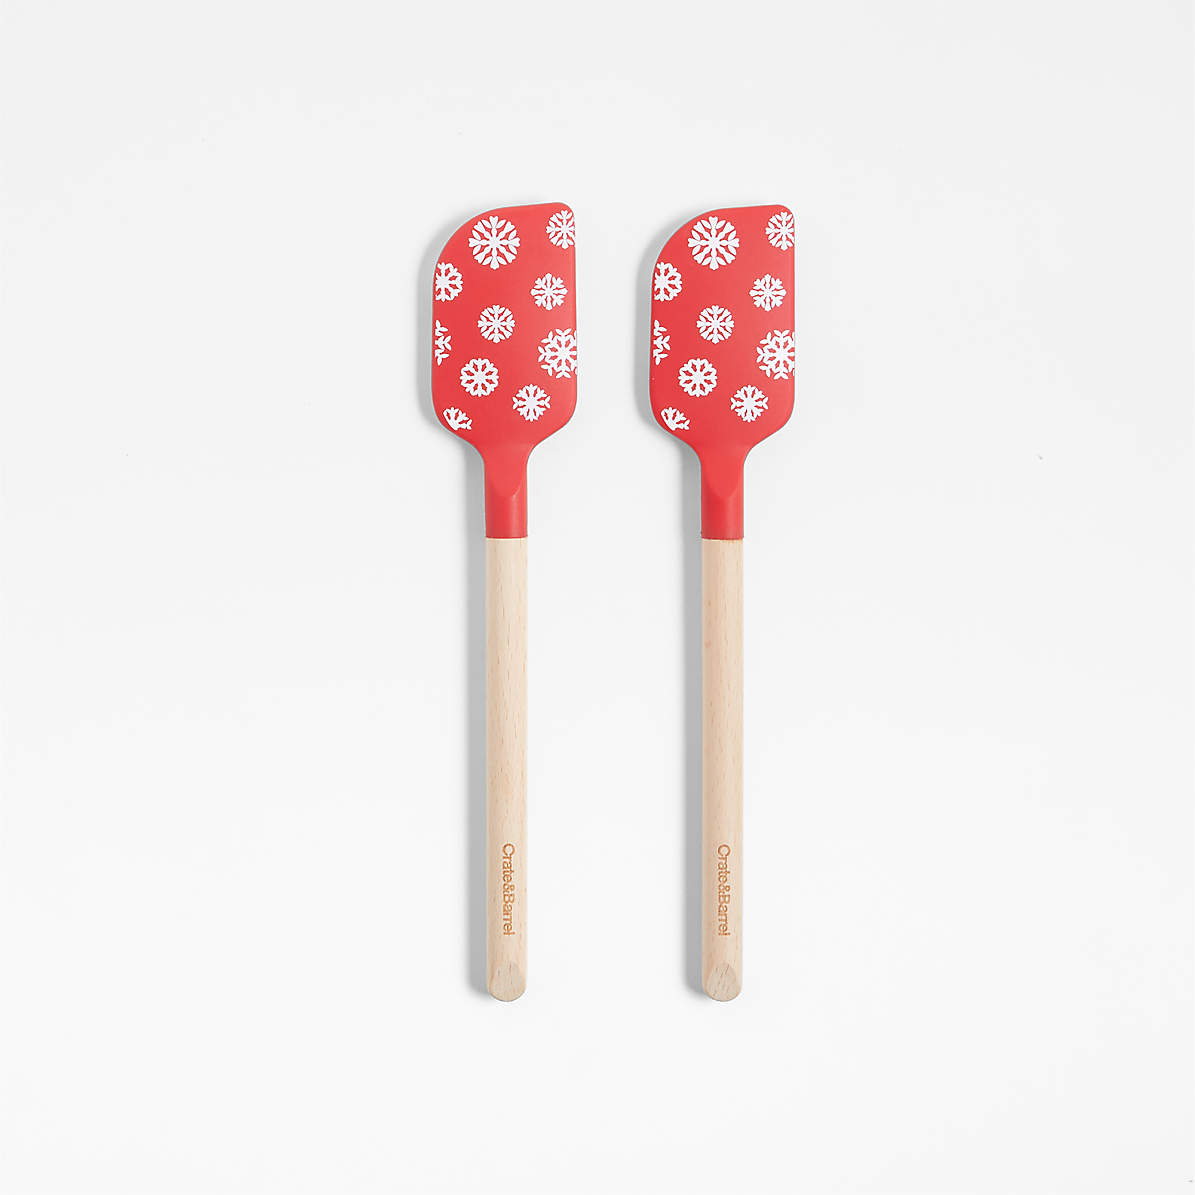 Crate & Barrel White Silicone and Stainless Steel Mini Spatulas, Set of 2 +  Reviews